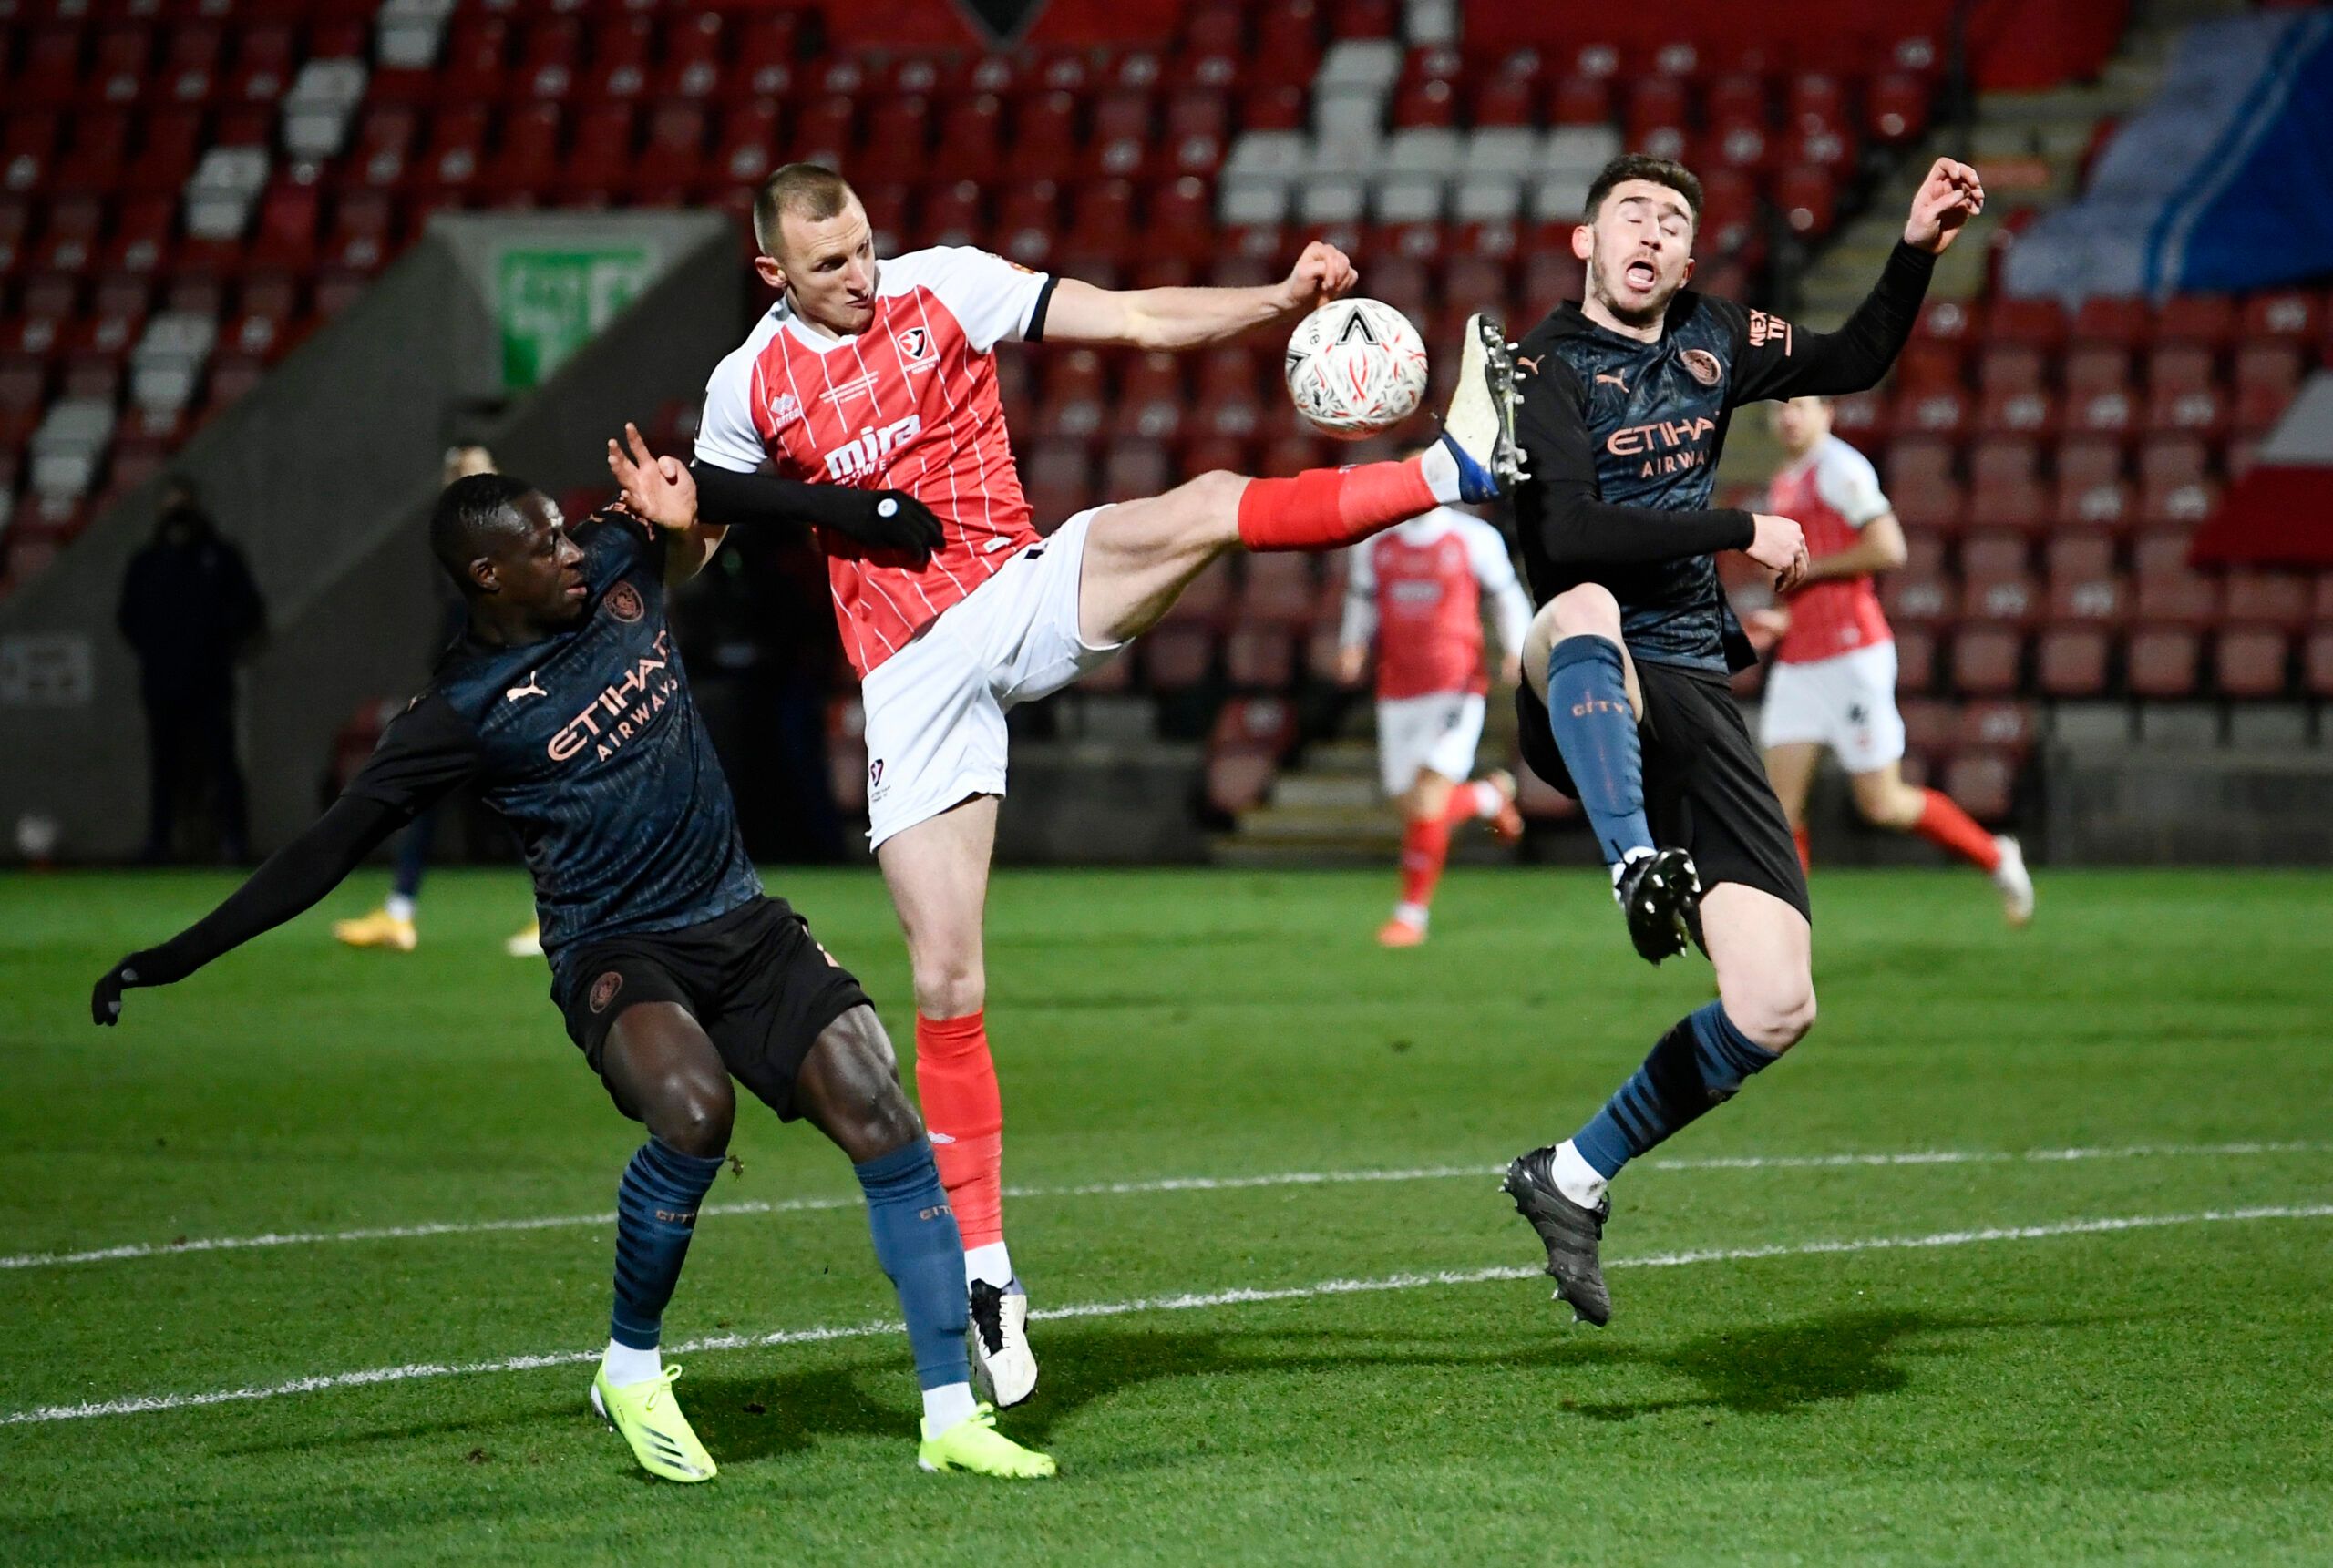 Soccer Football - FA Cup - Fourth Round - Cheltenham Town v Manchester City - The Jonny-Rocks Stadium, Cheltenham, Britain - January 23, 2021 Cheltenham Town's William Boyle in action with Manchester City's Aymeric Laporte and Benjamin Mendy Pool via REUTERS/Toby Melville